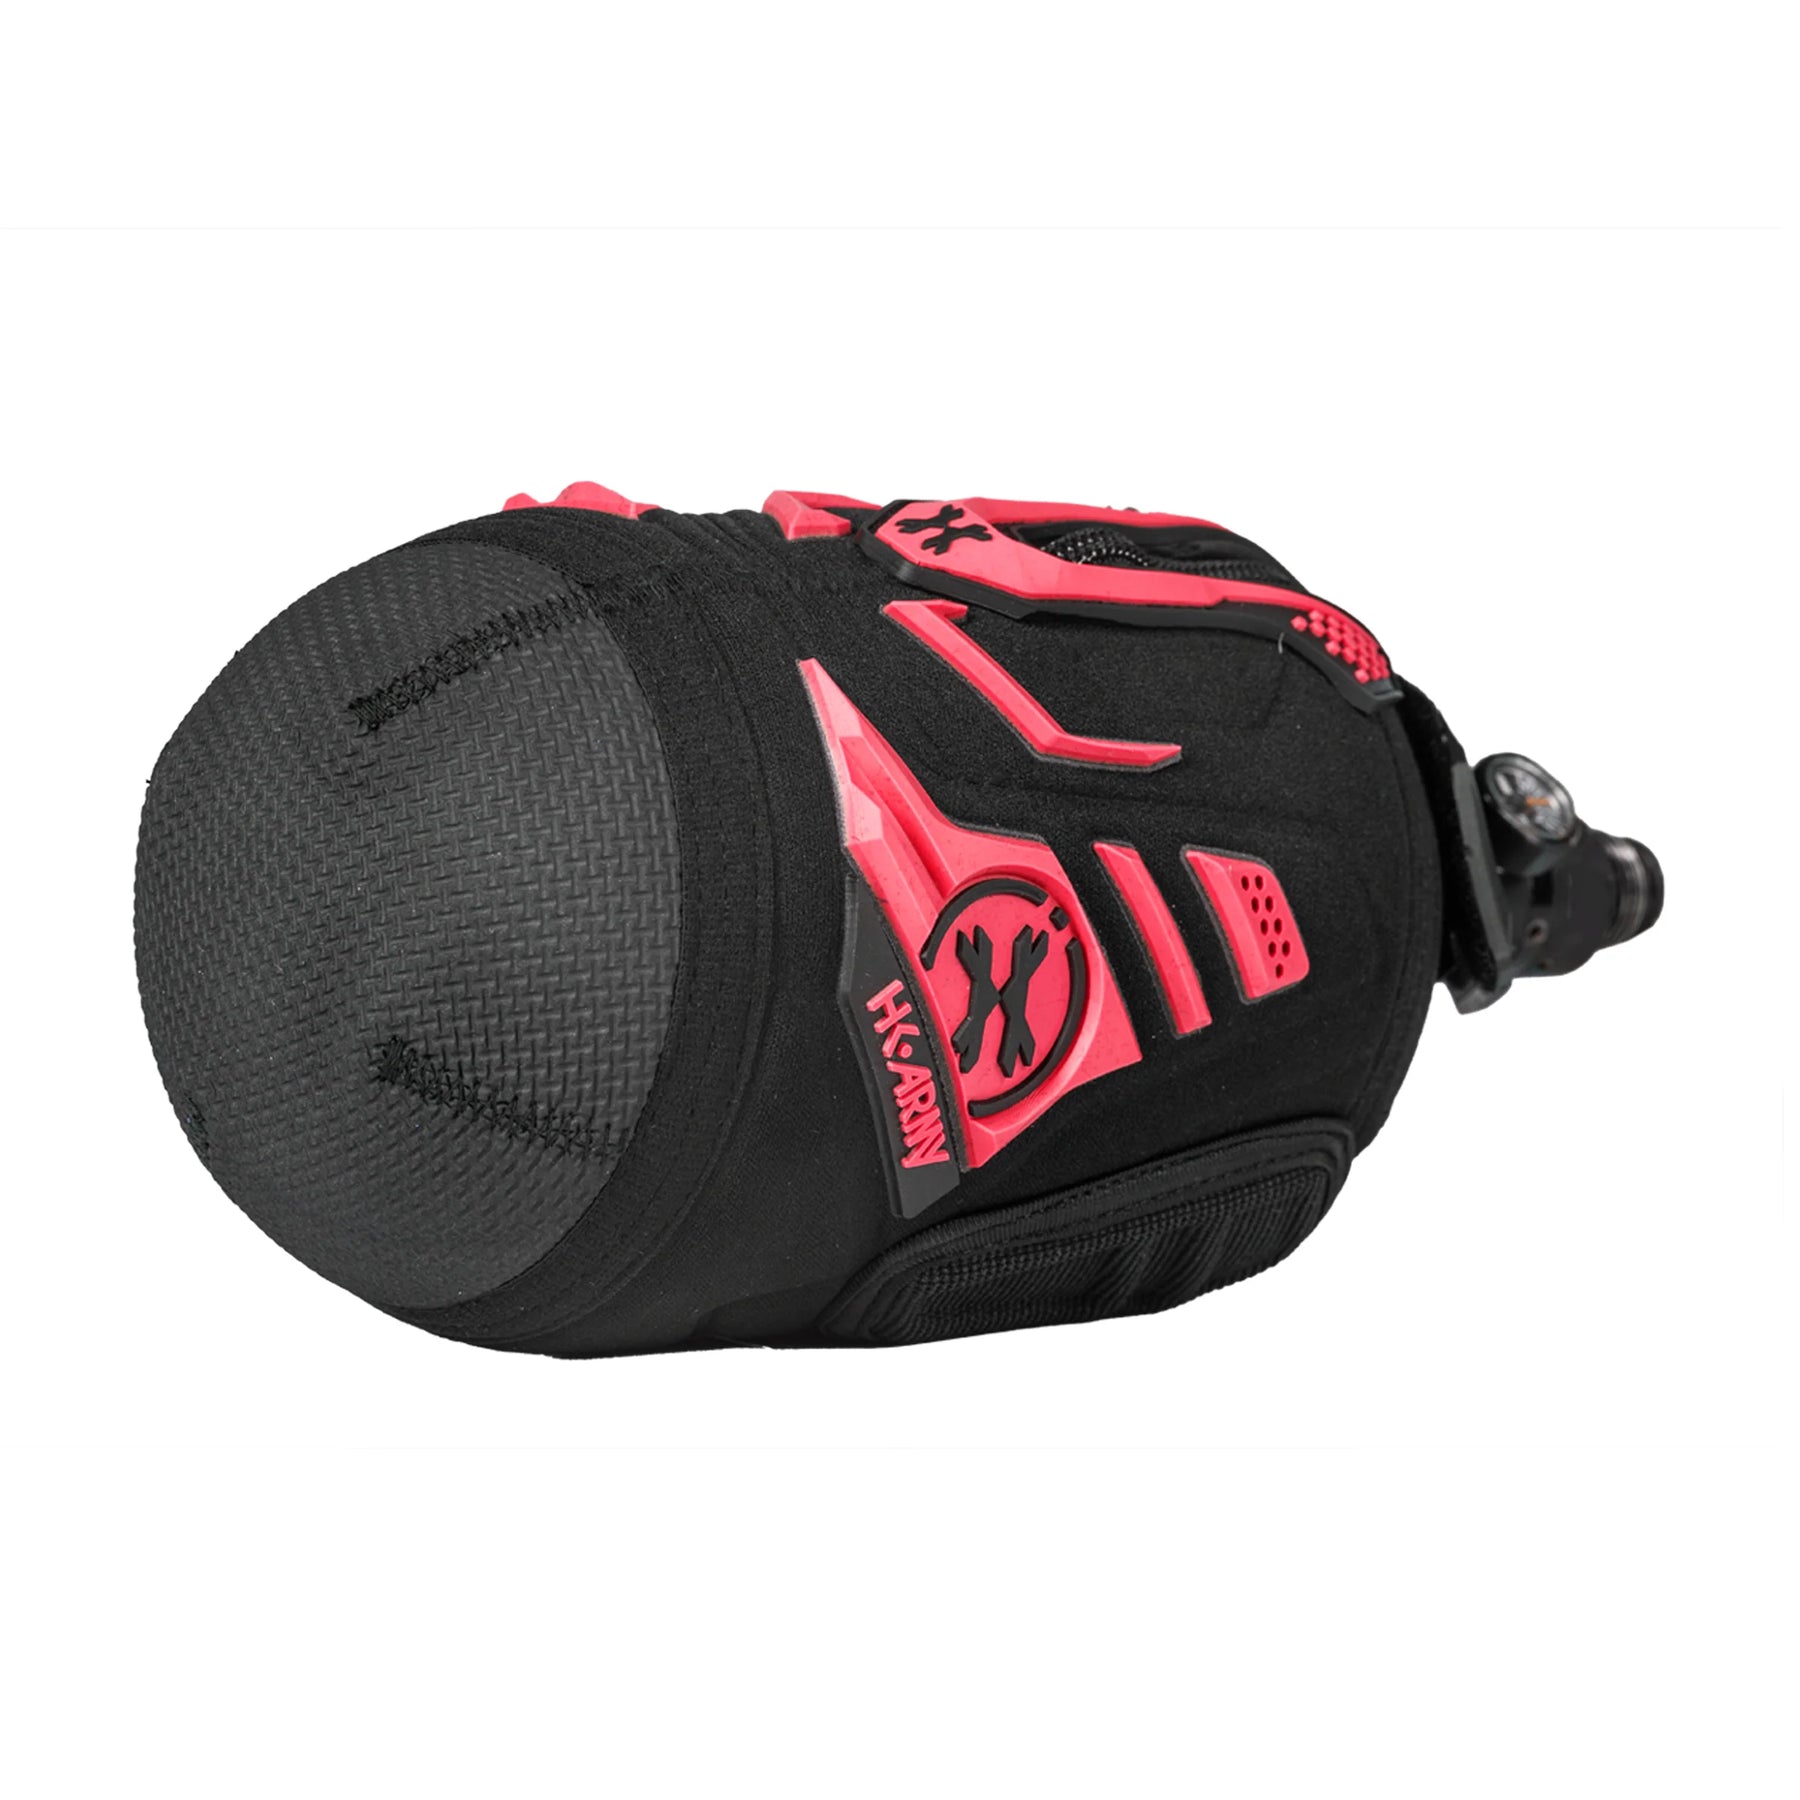 Paintball air tank cover / sleeve | hardline armored - Color: red/black fire